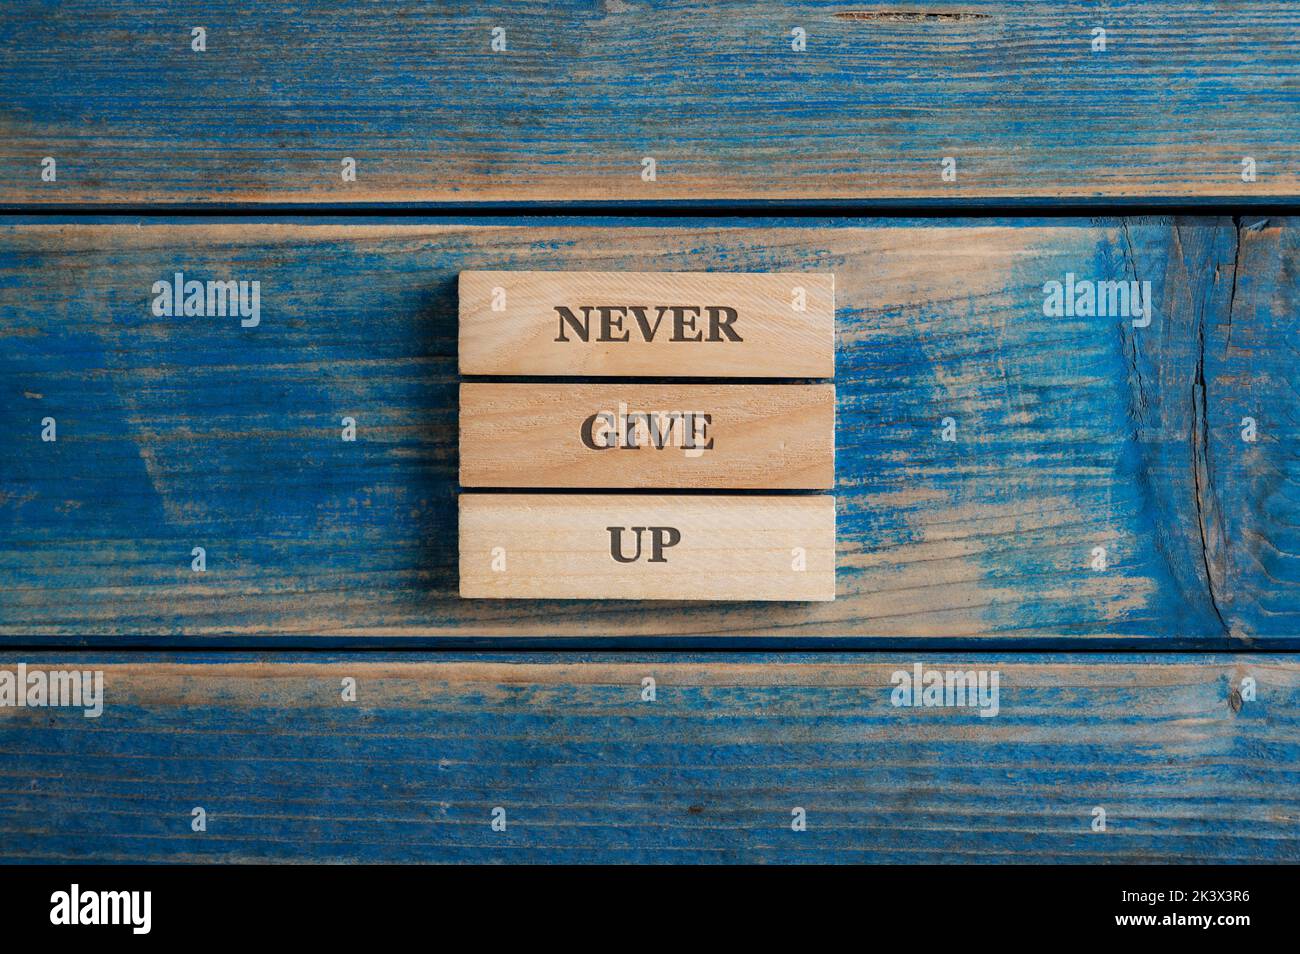 Never give up sign spelled on a stack of three woden pegs placed over textured blue wooden background. Stock Photo